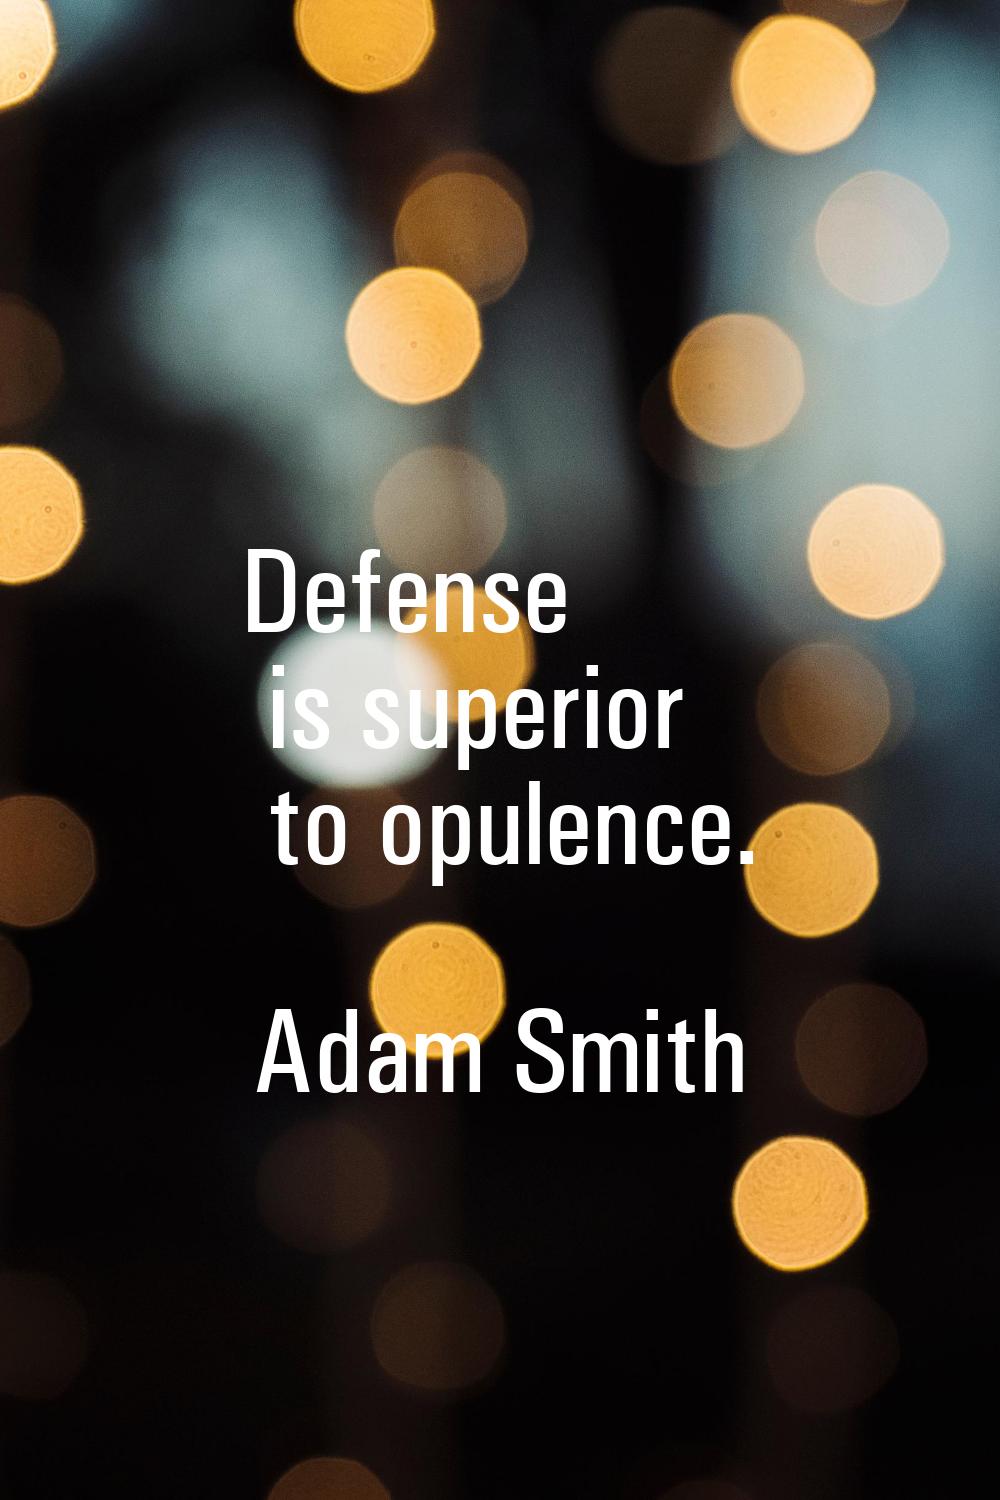 Defense is superior to opulence.